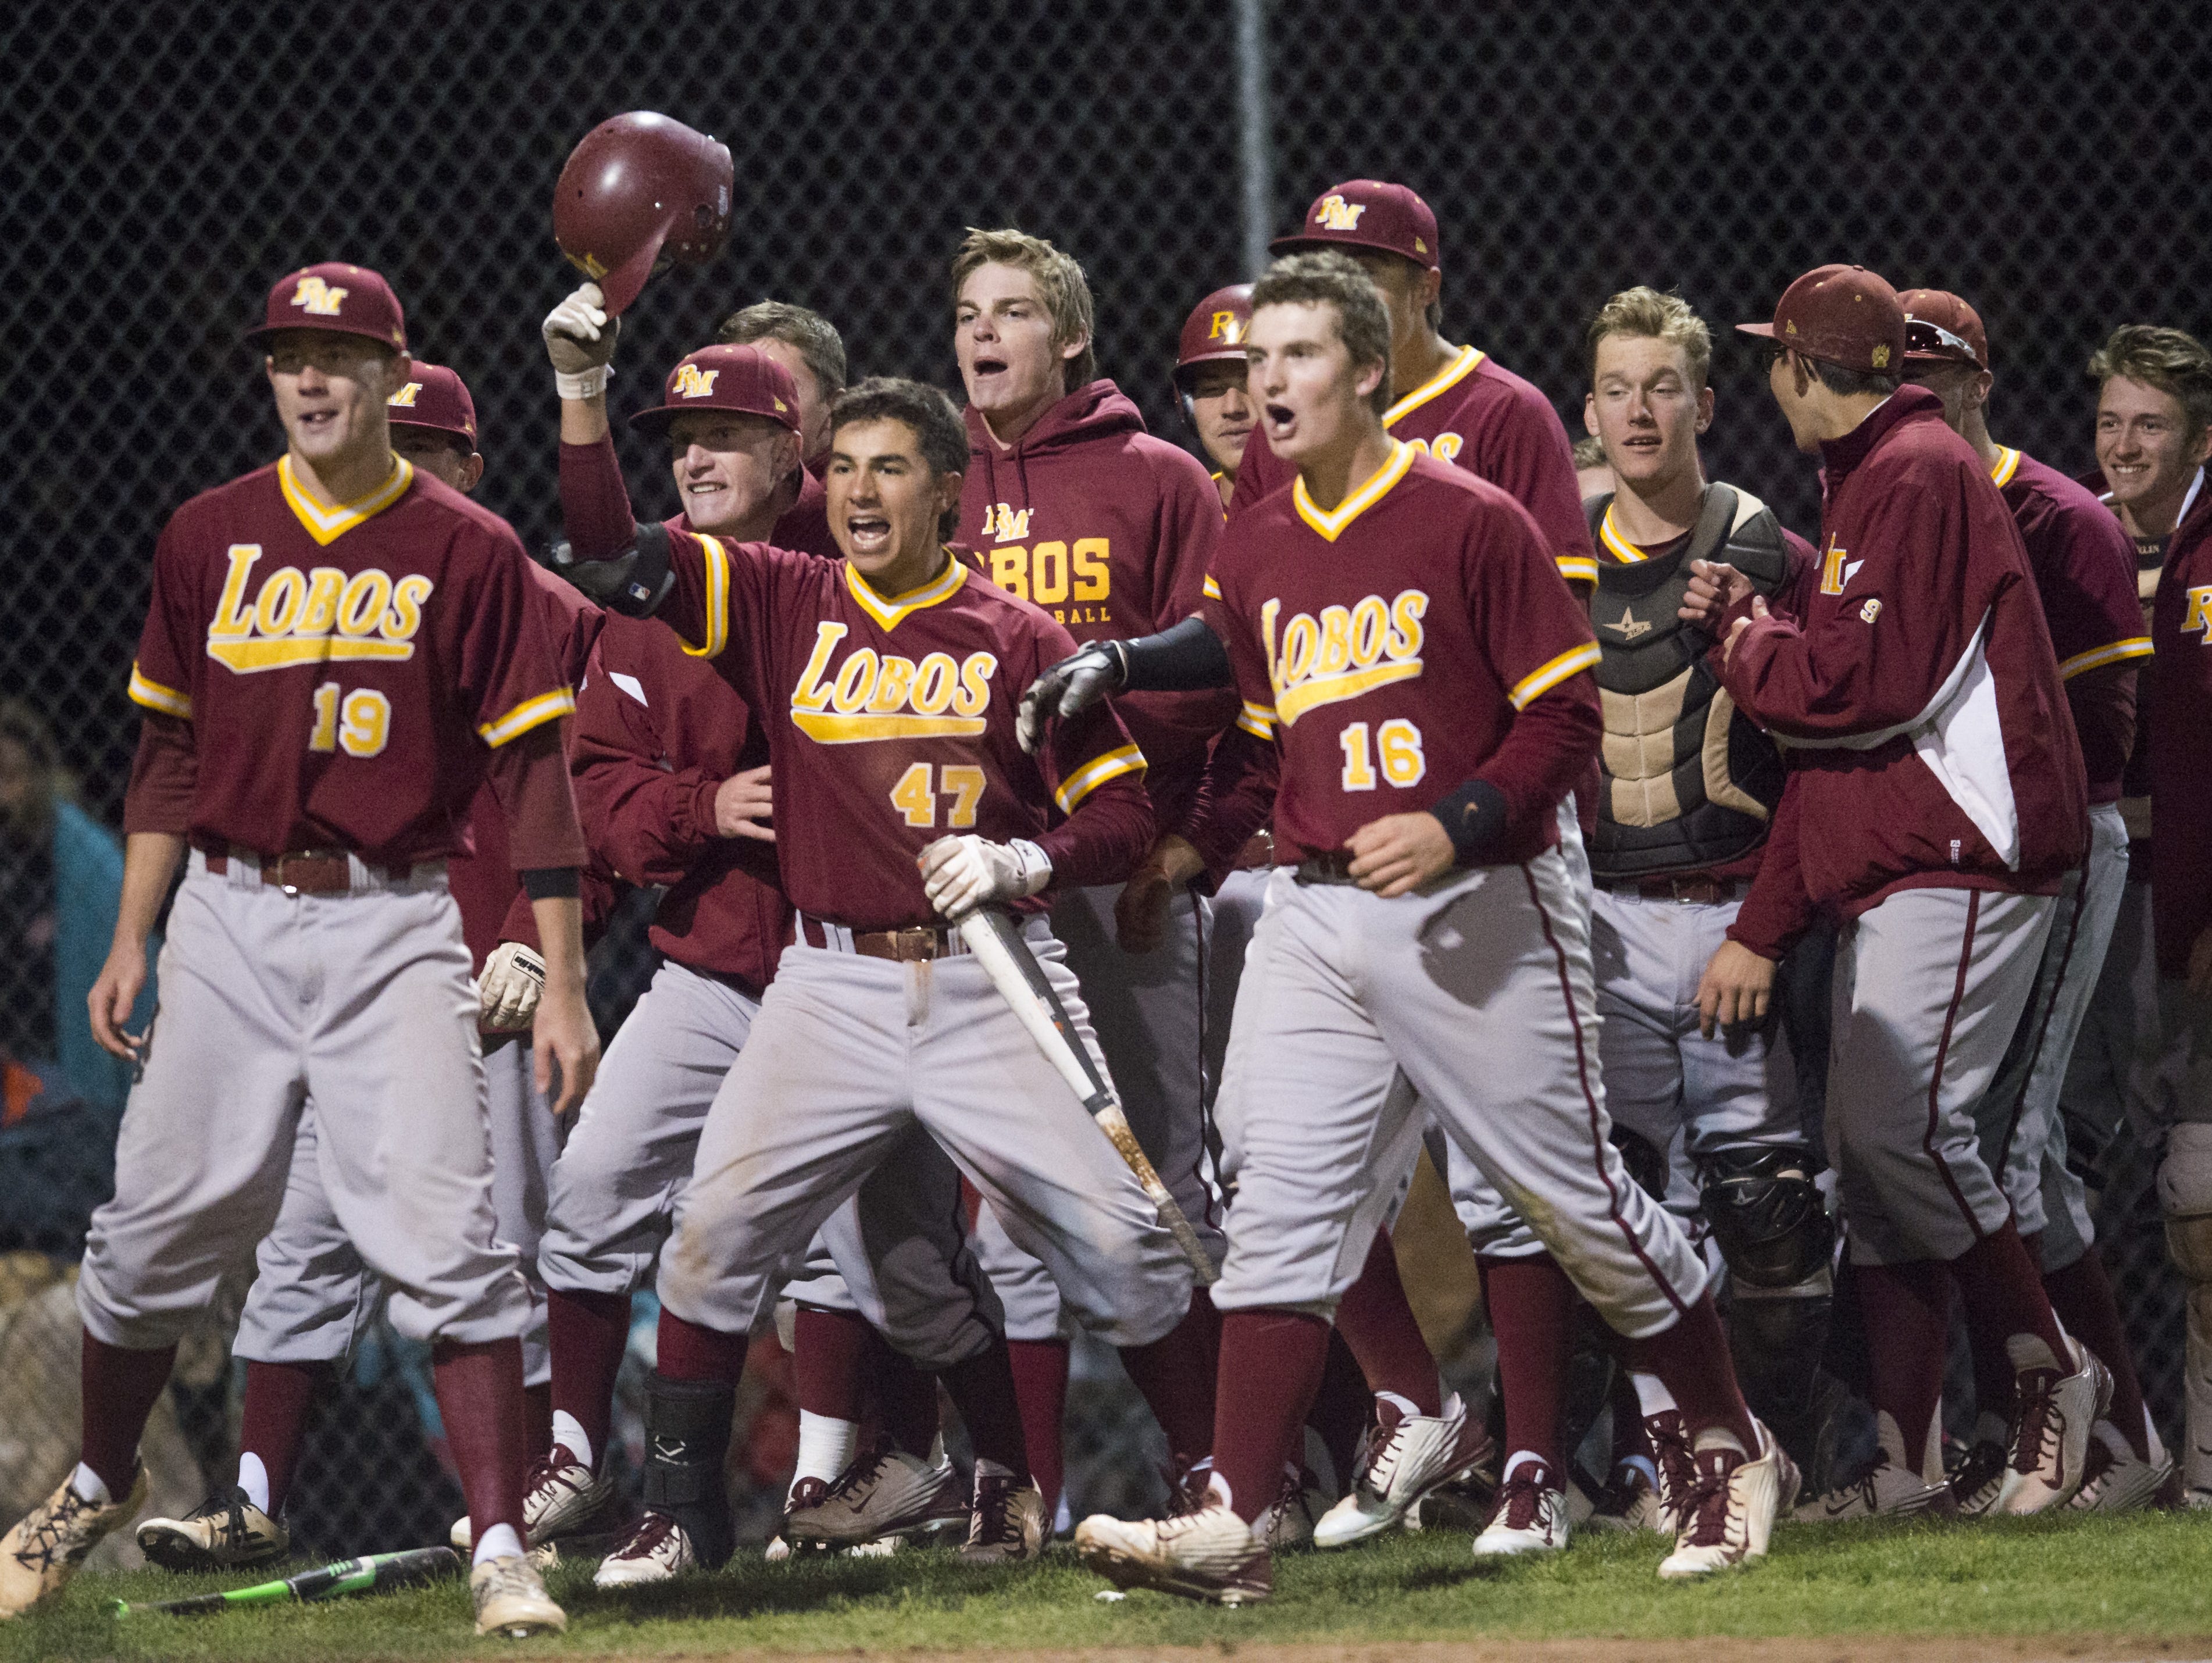 The Rocky Mountain High School baseball team plays Cherry Creek at 2:30 p.m. Friday in the Final Four of the state tournament.